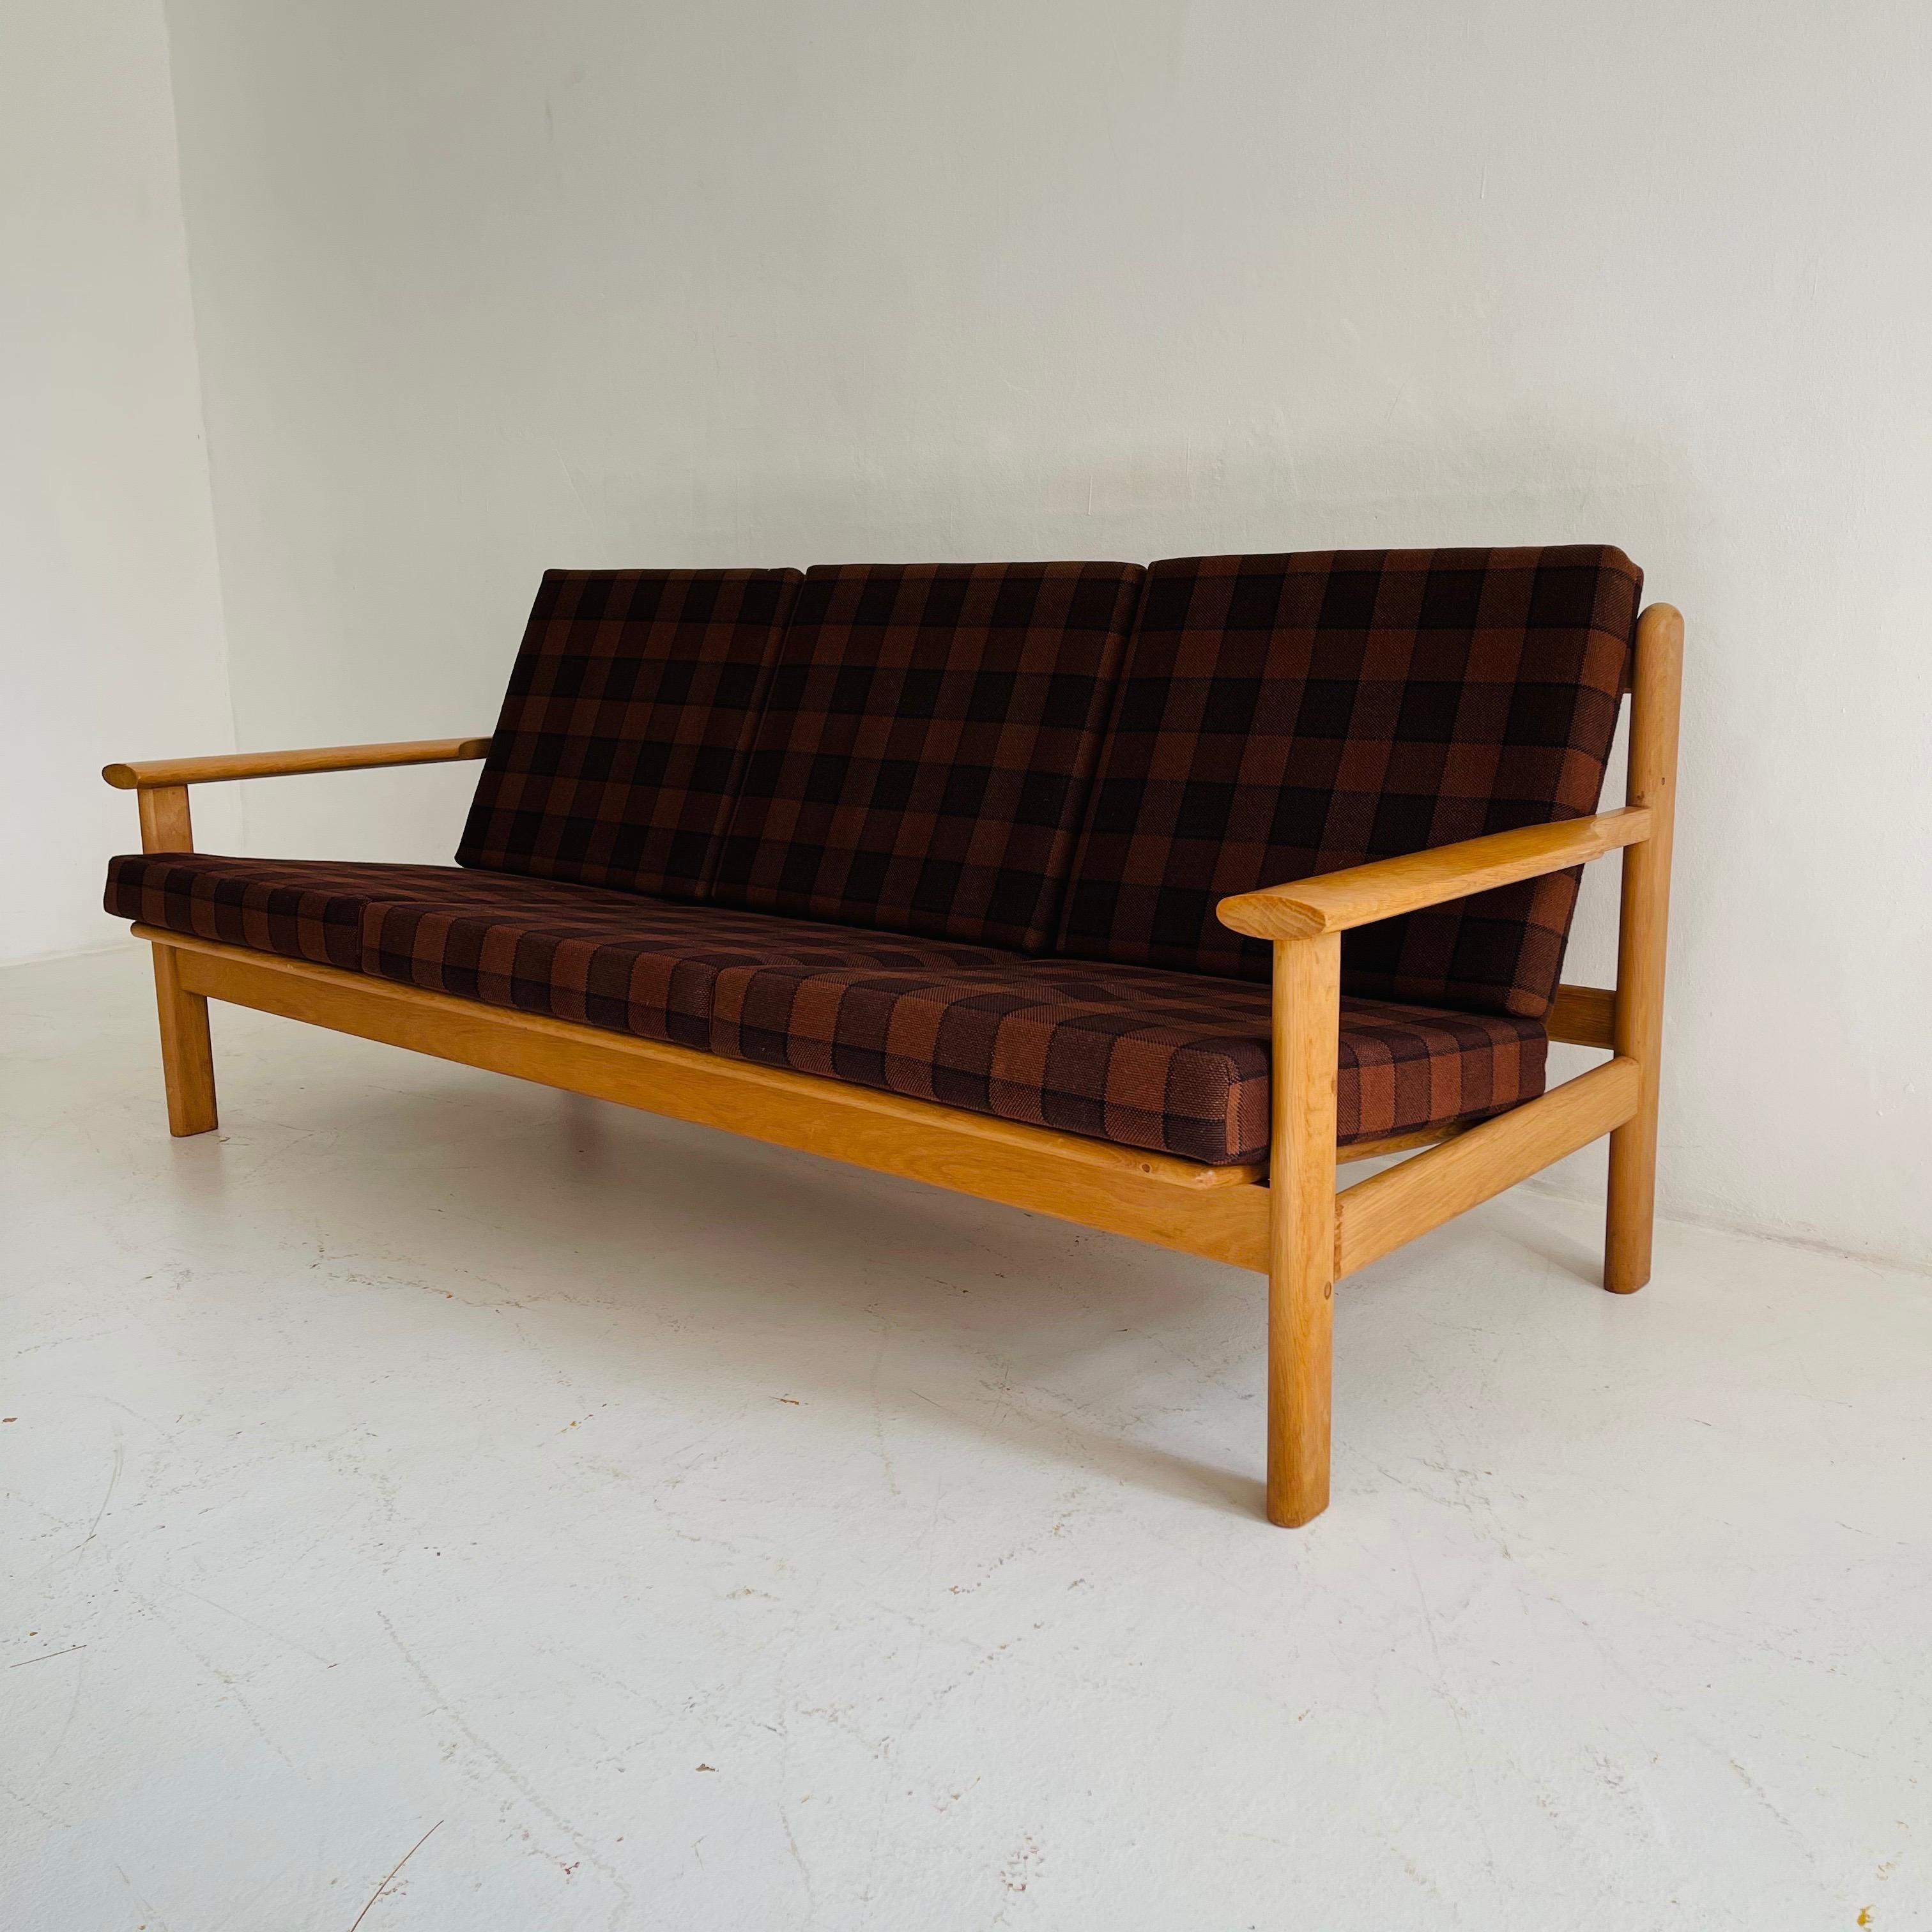 Living Room Suite Sofa Lounge Chair by Poul Volther for Frem Rølje, Denmark 1950 For Sale 1